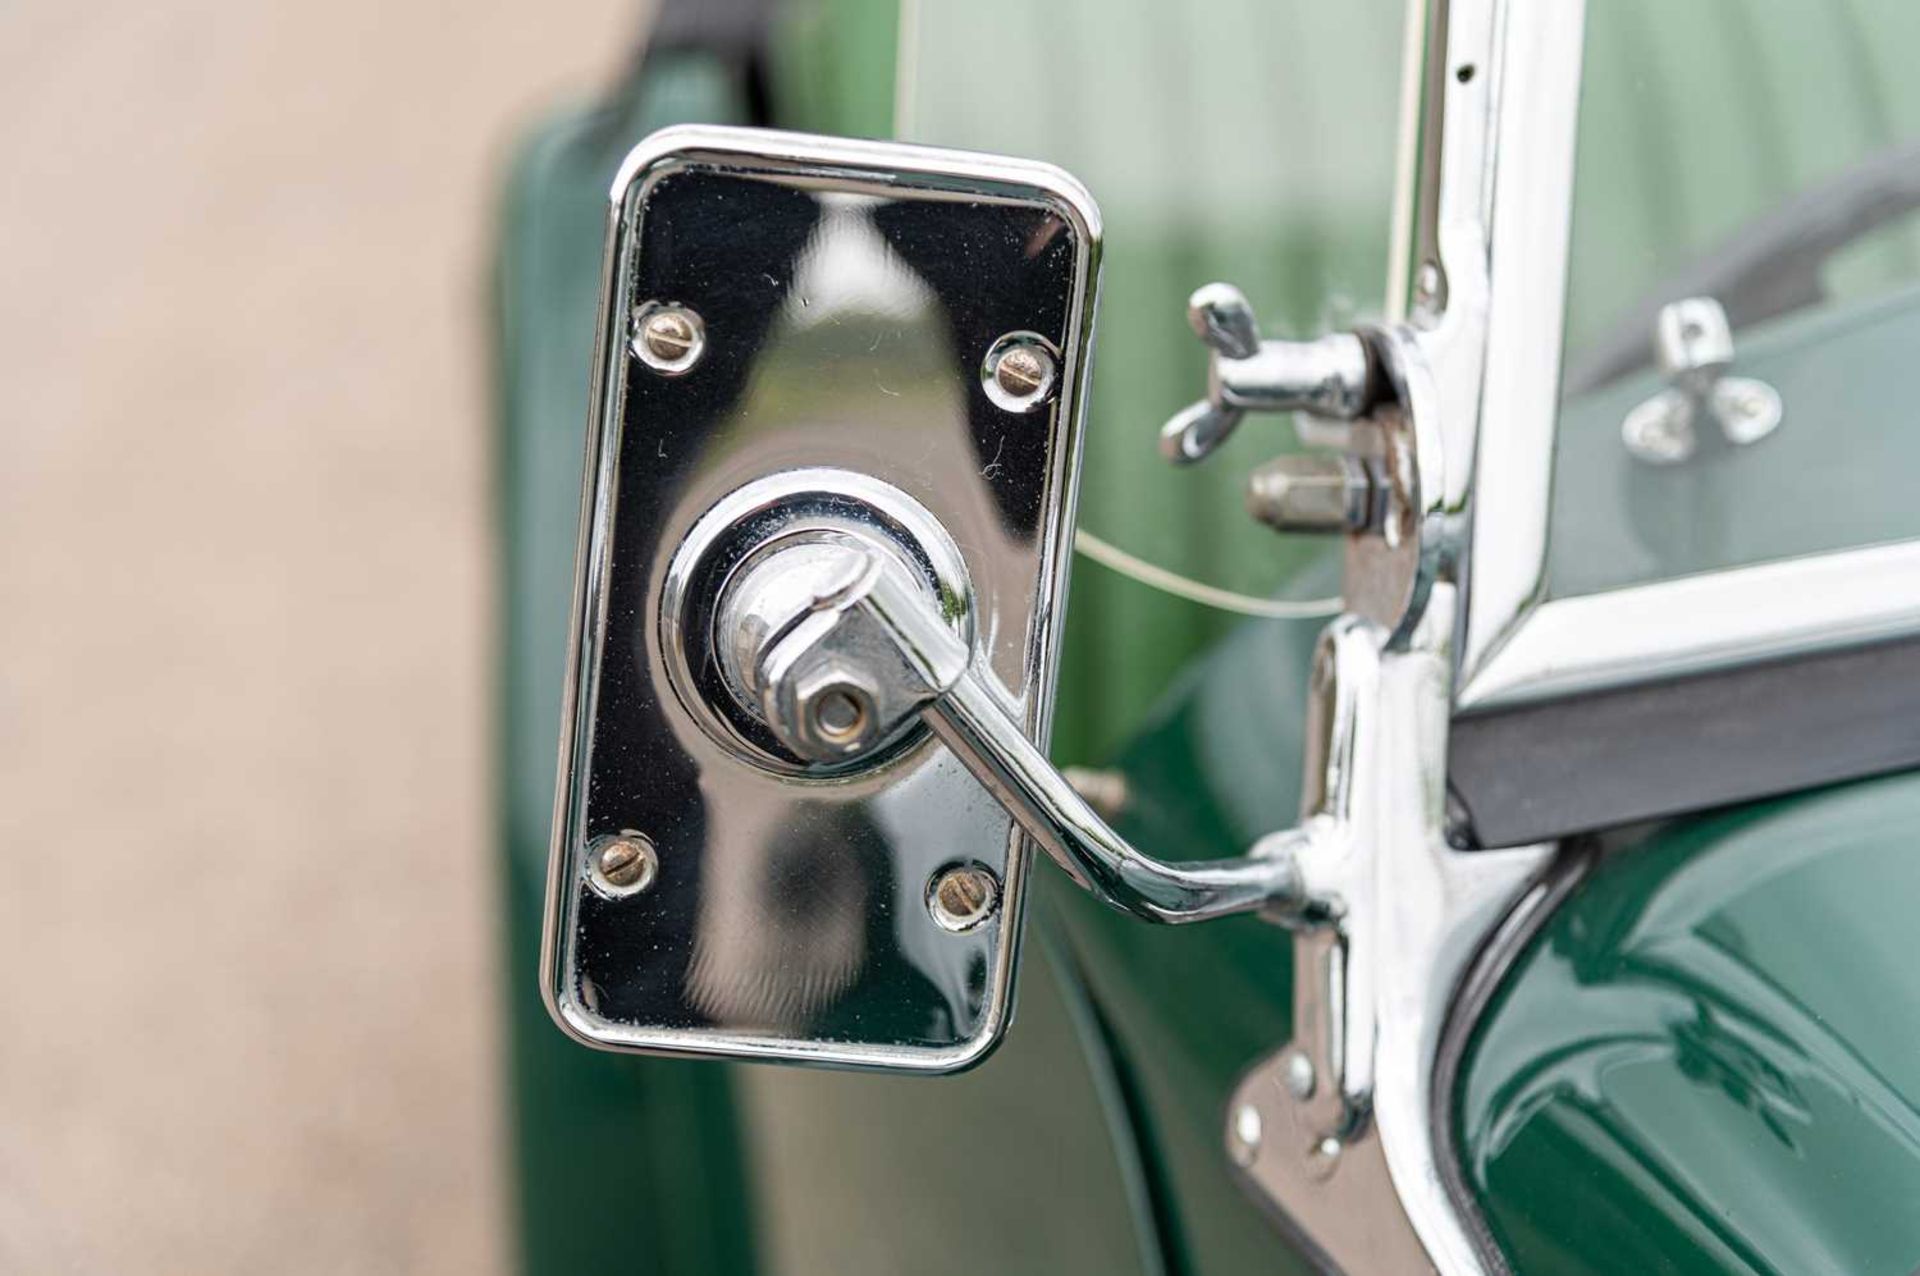 1947 MG TC Midget  Fully restored, right-hand-drive UK home market example - Image 33 of 76